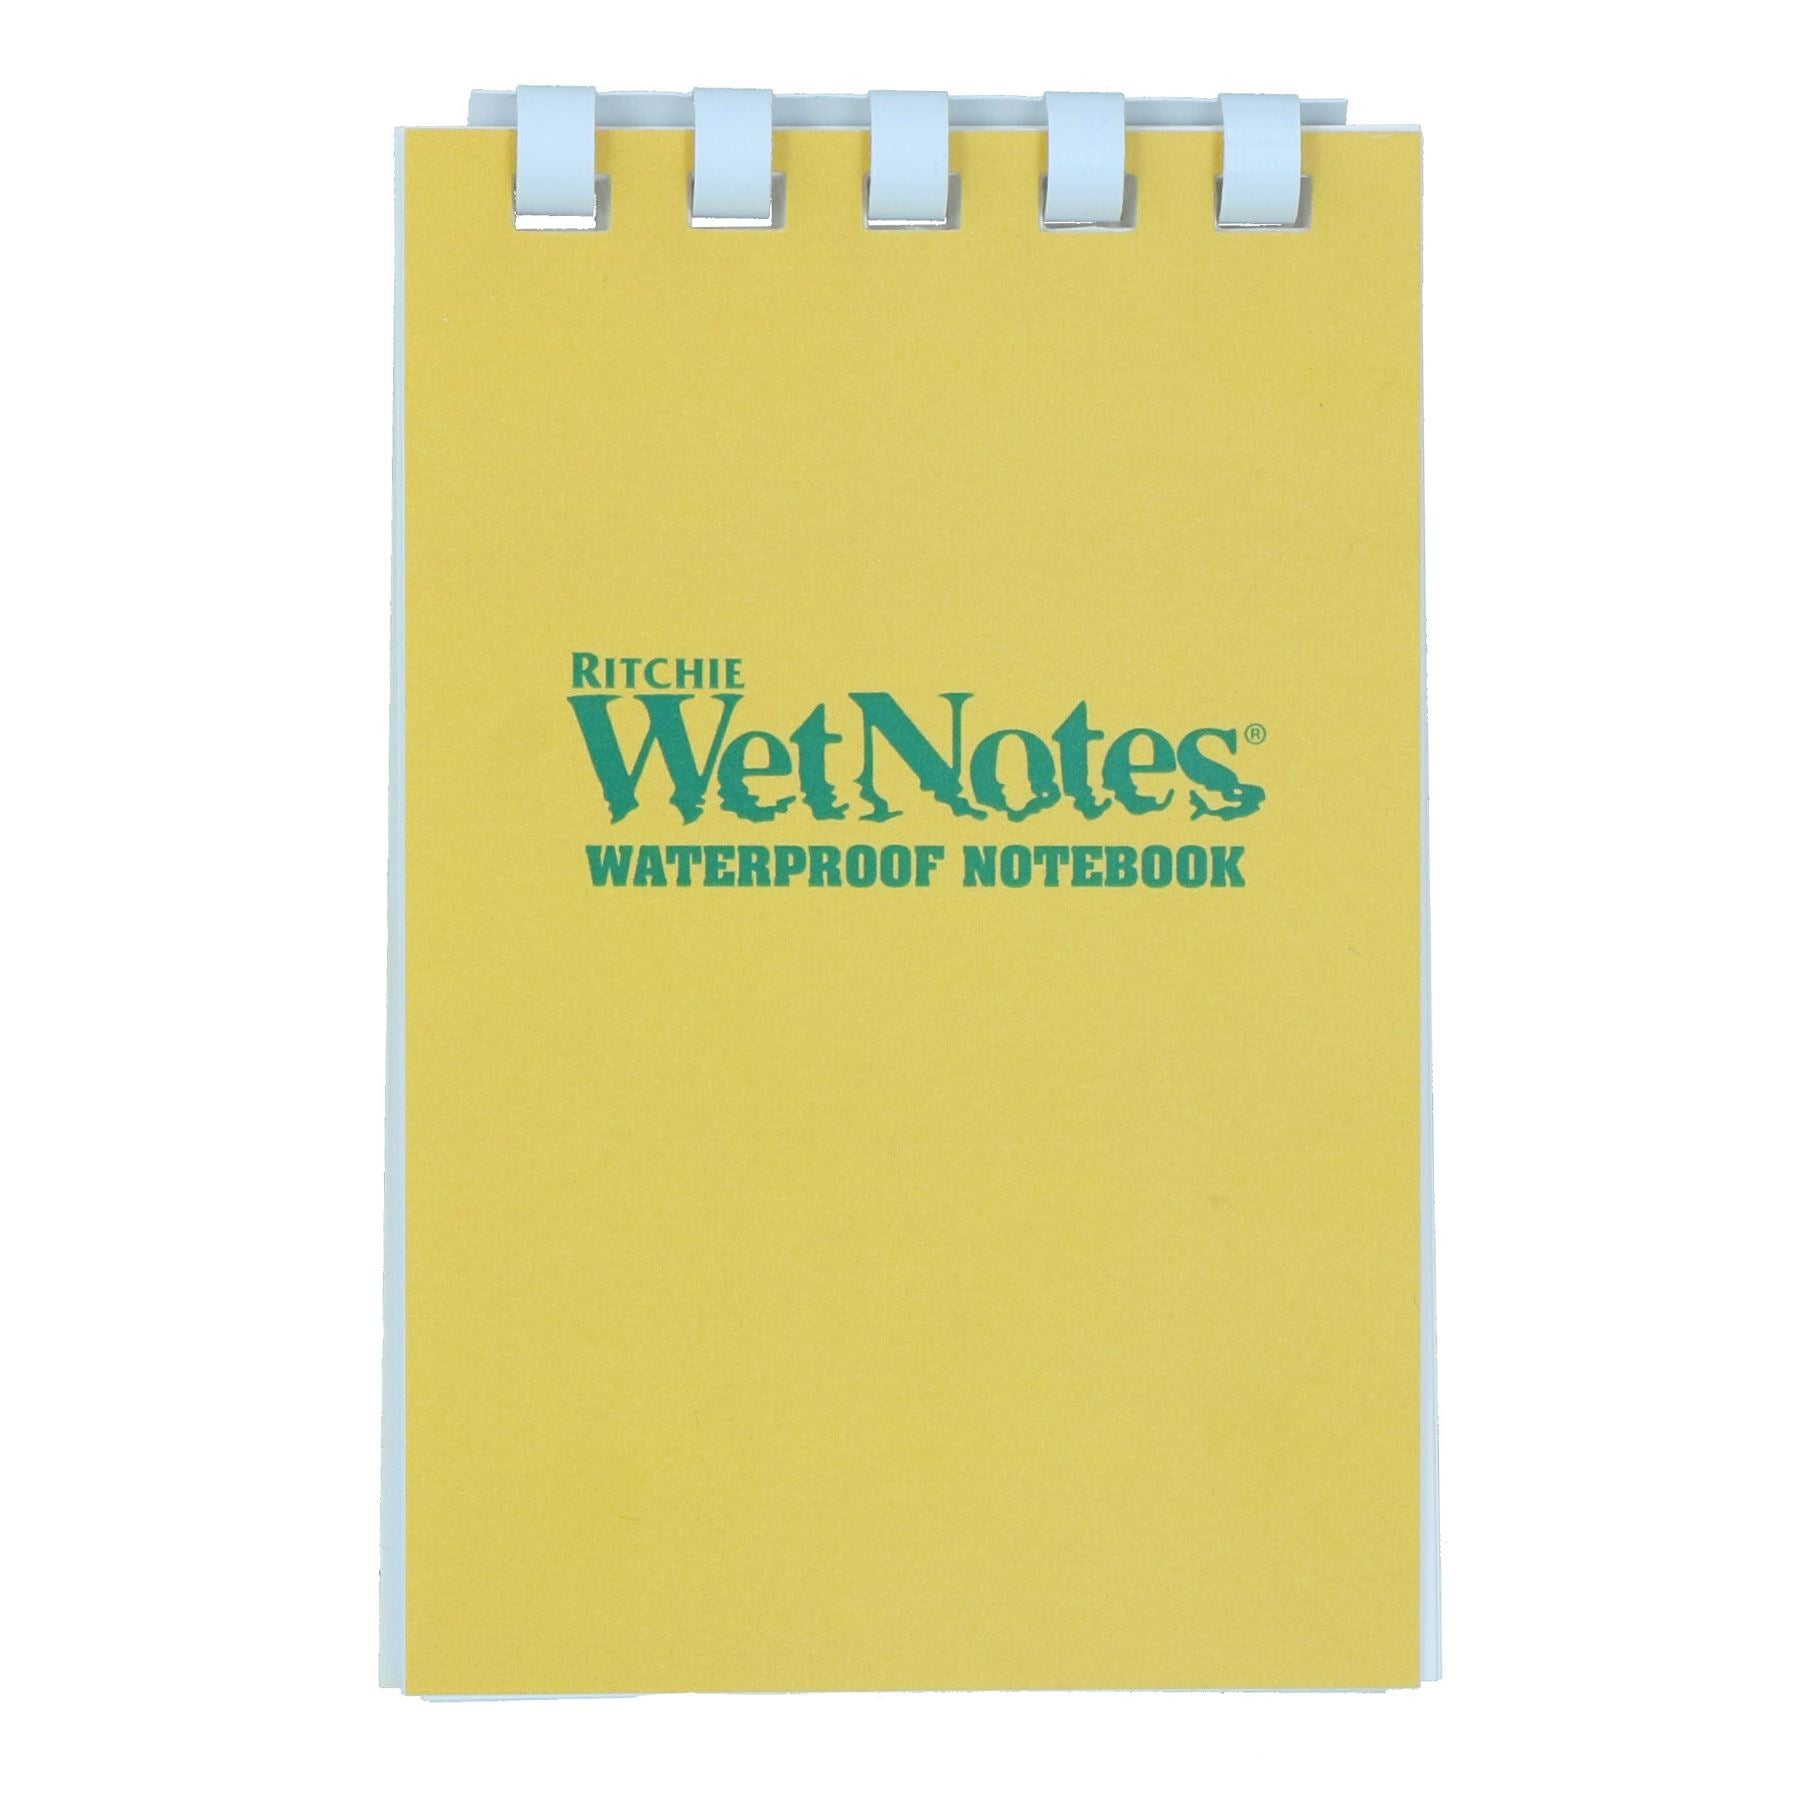 Pocket Wet Notes Waterproof Notebook Divers Paper Ritchie Outdoor Sports